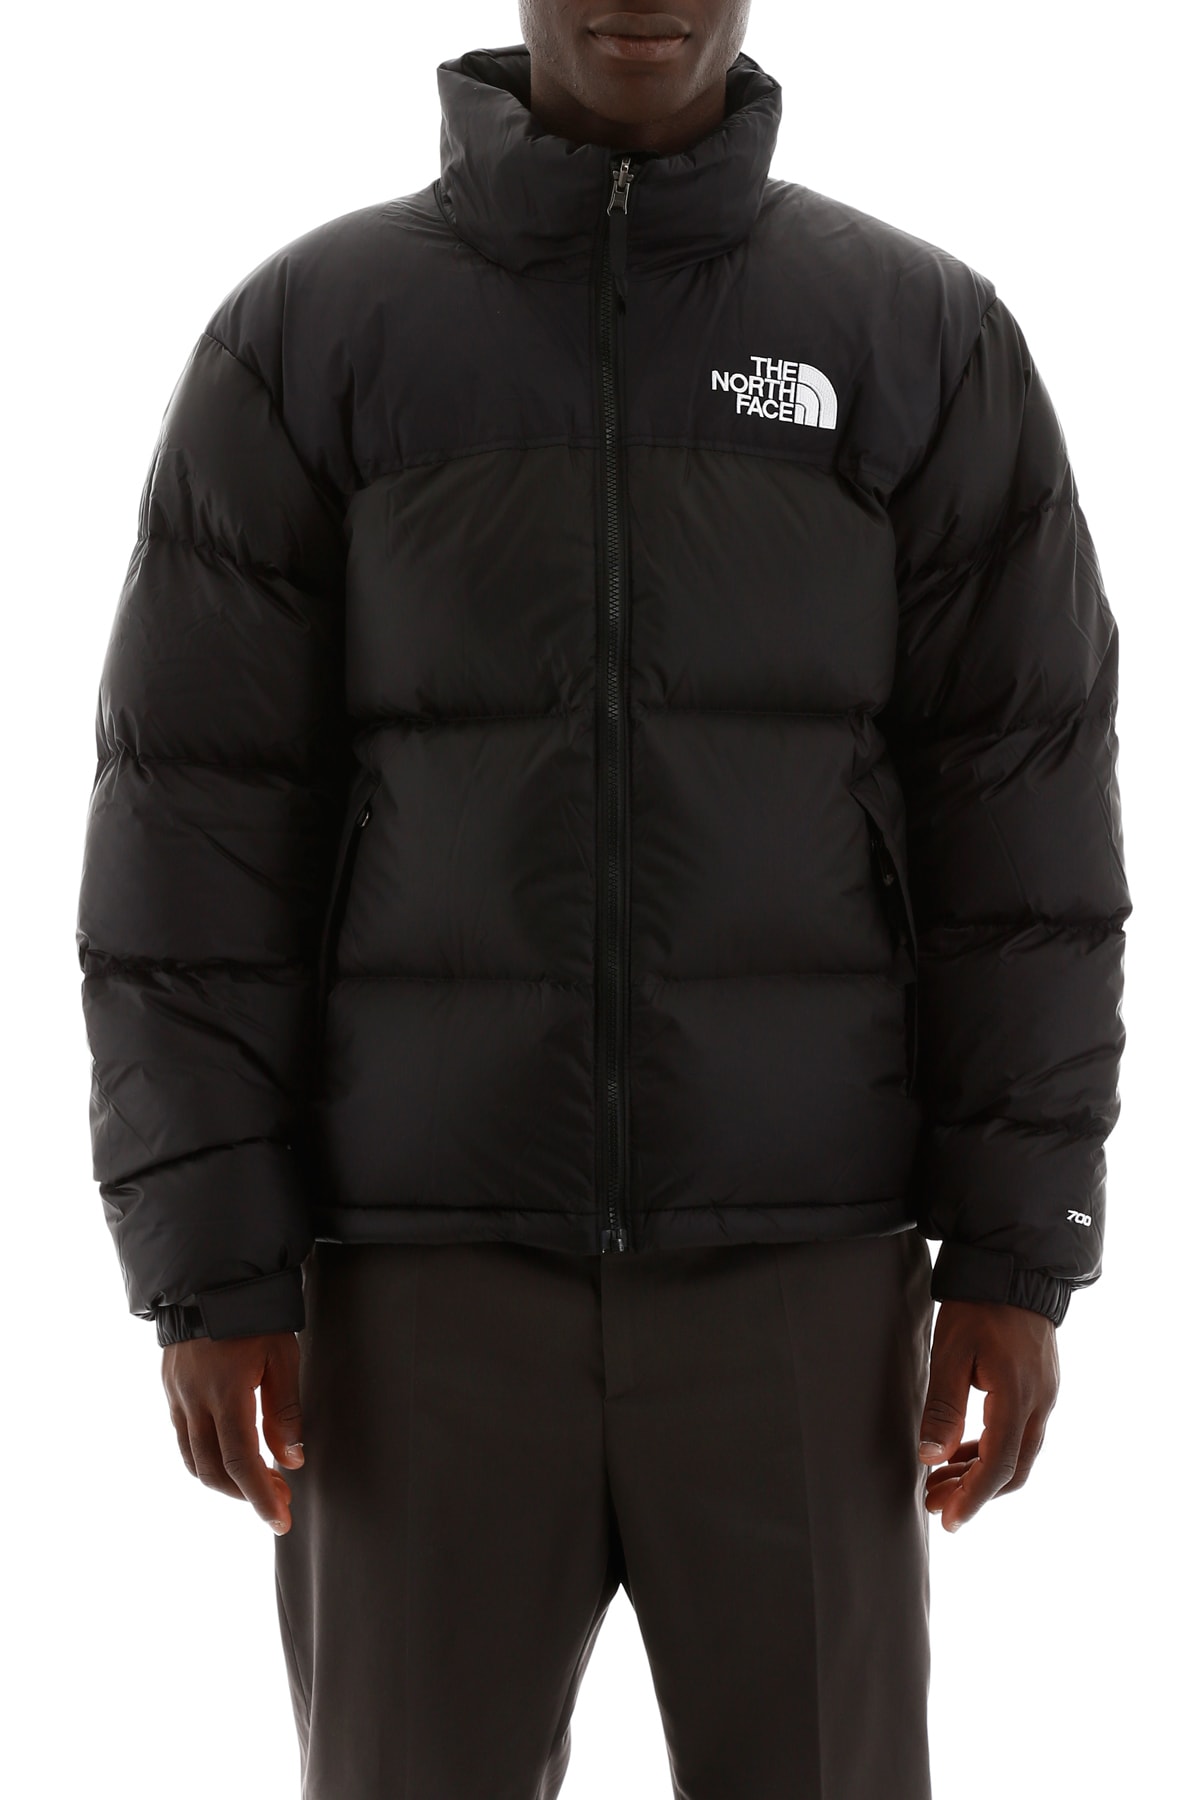 North face puffer jacket 1996 black stores yde